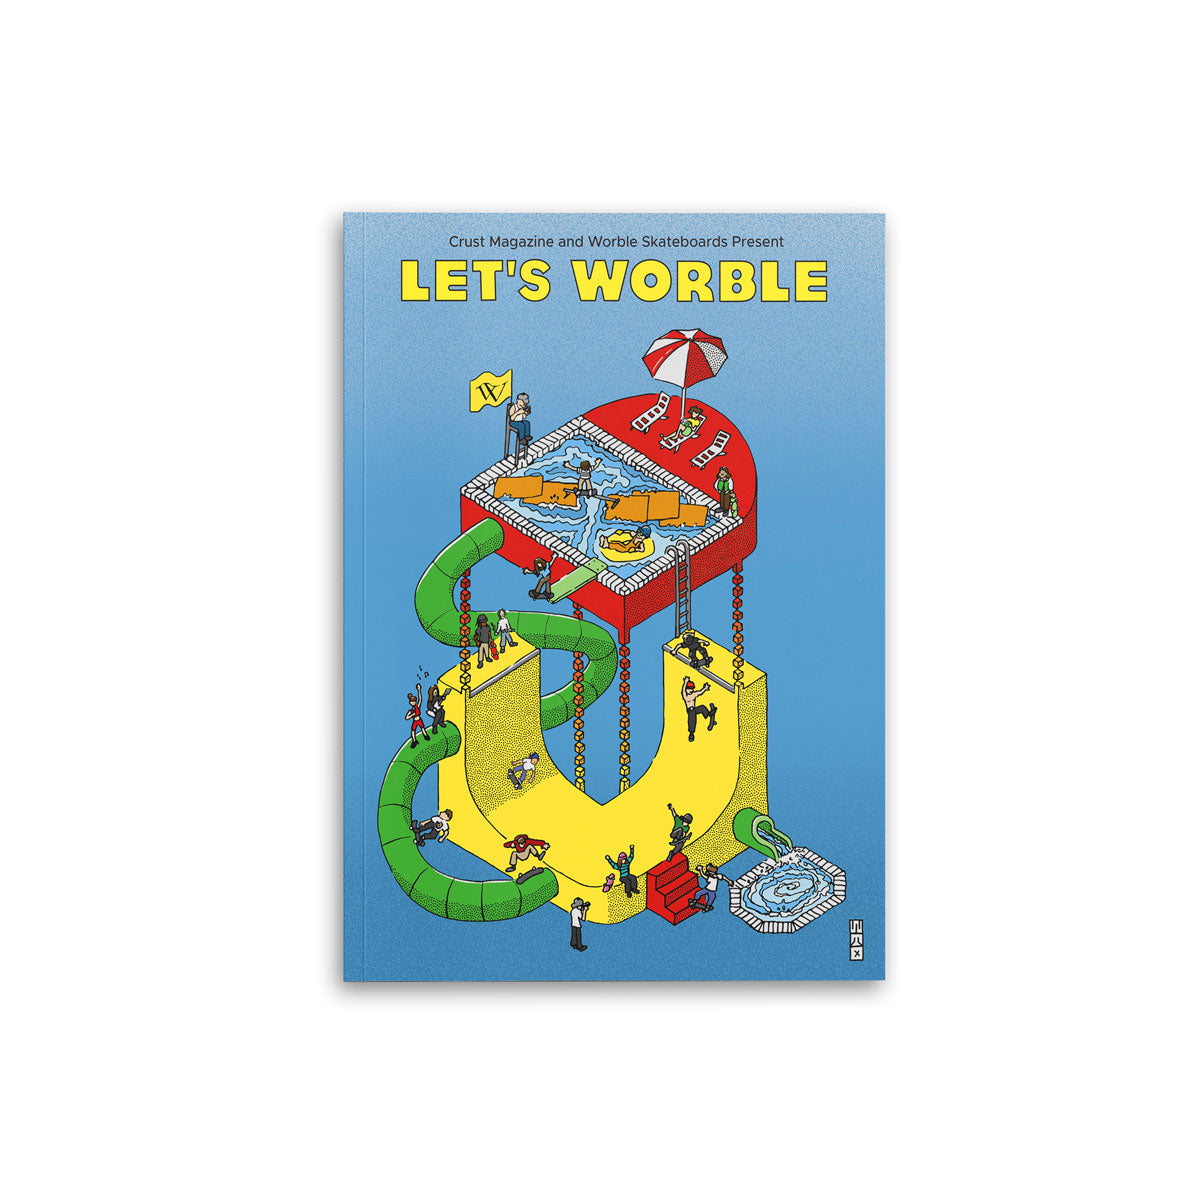 WORBLE x CRUST MAG - "LET'S WORBLE" MAGAZINE